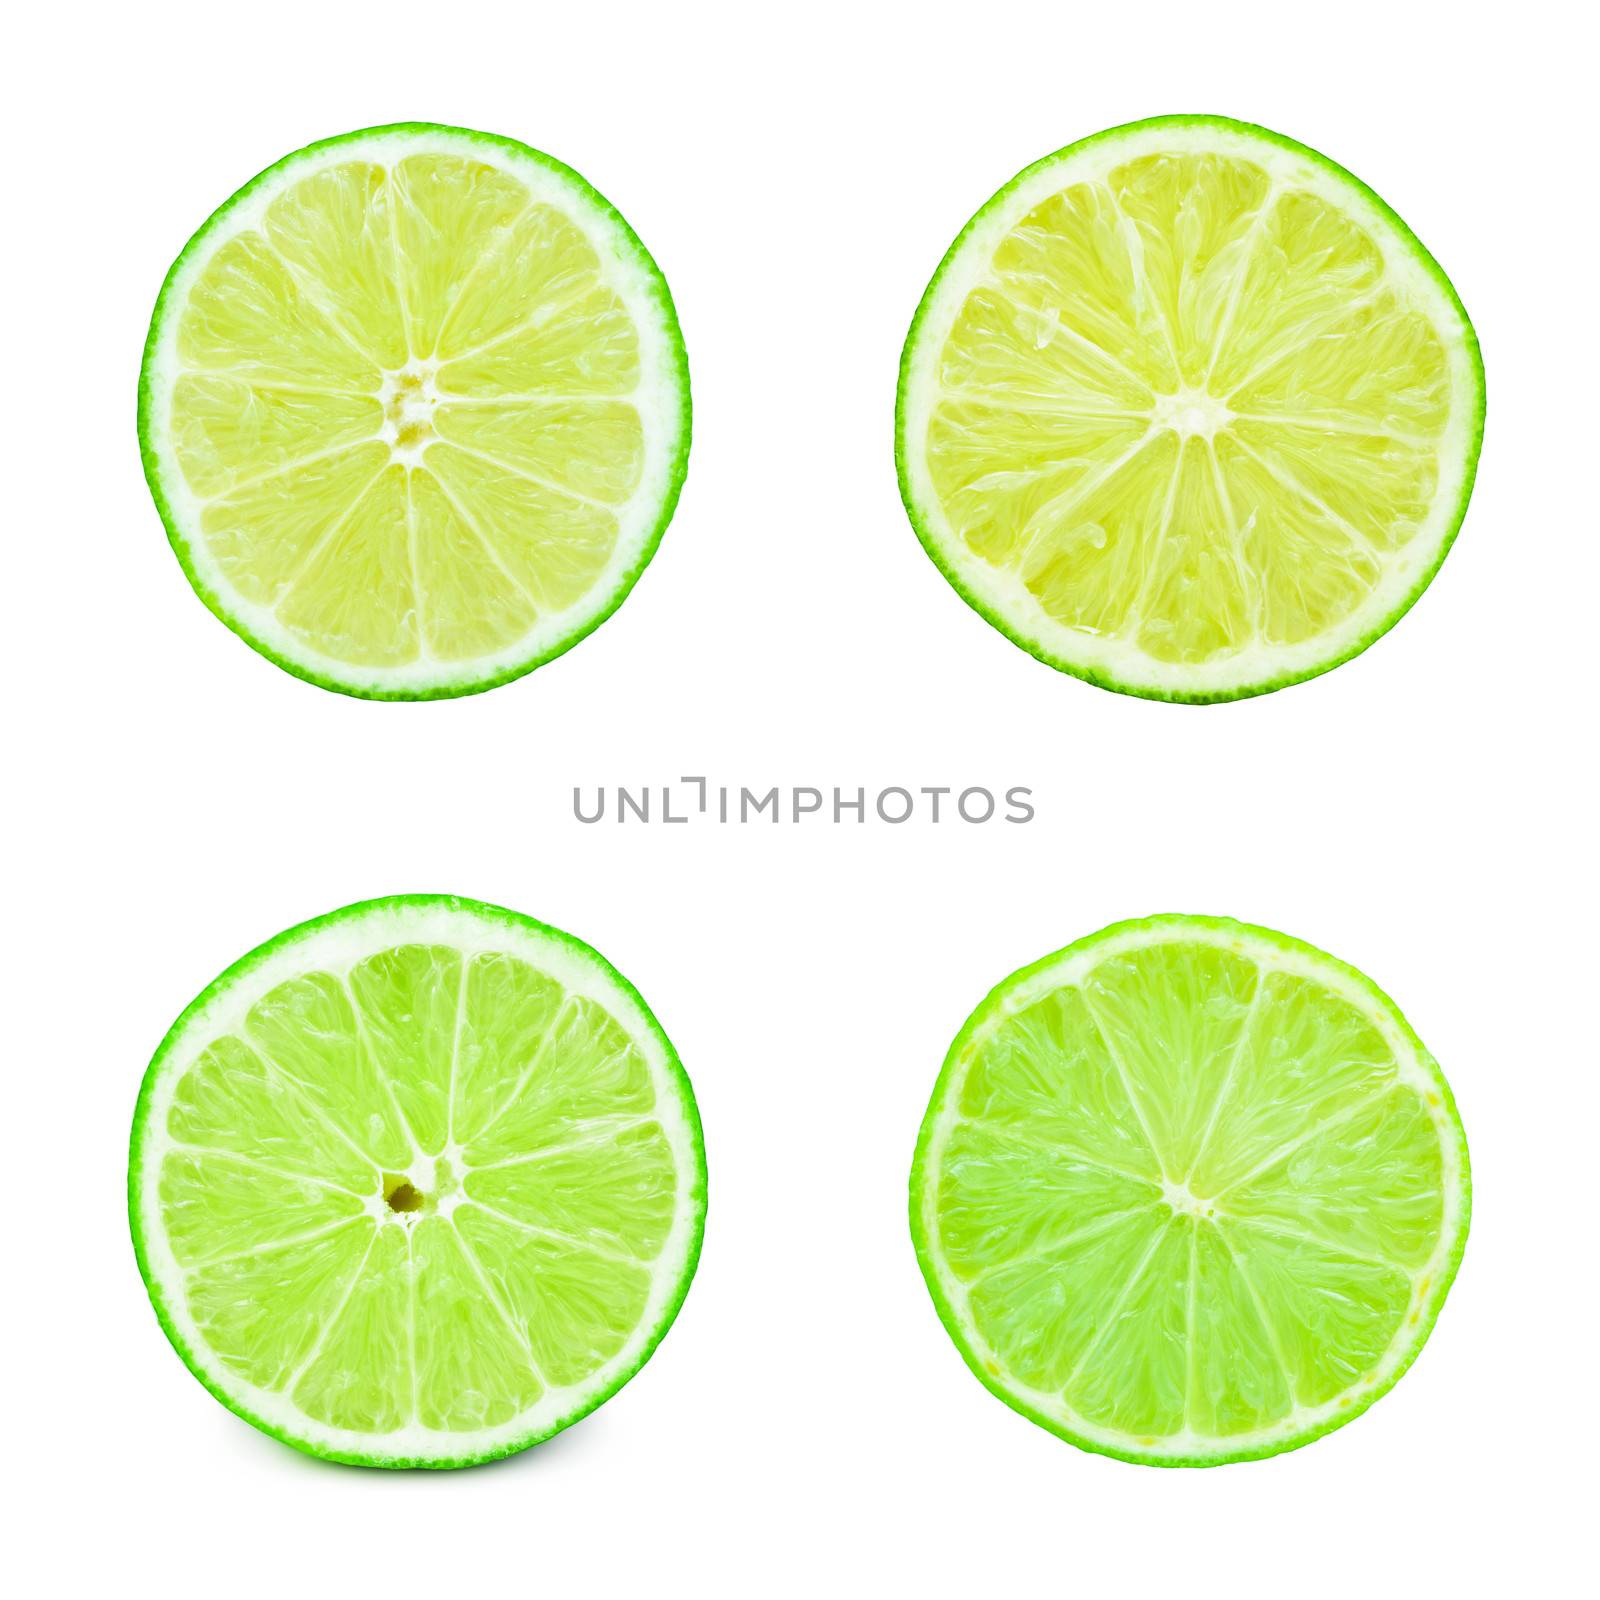 Collection of fresh green limes isolated on white background